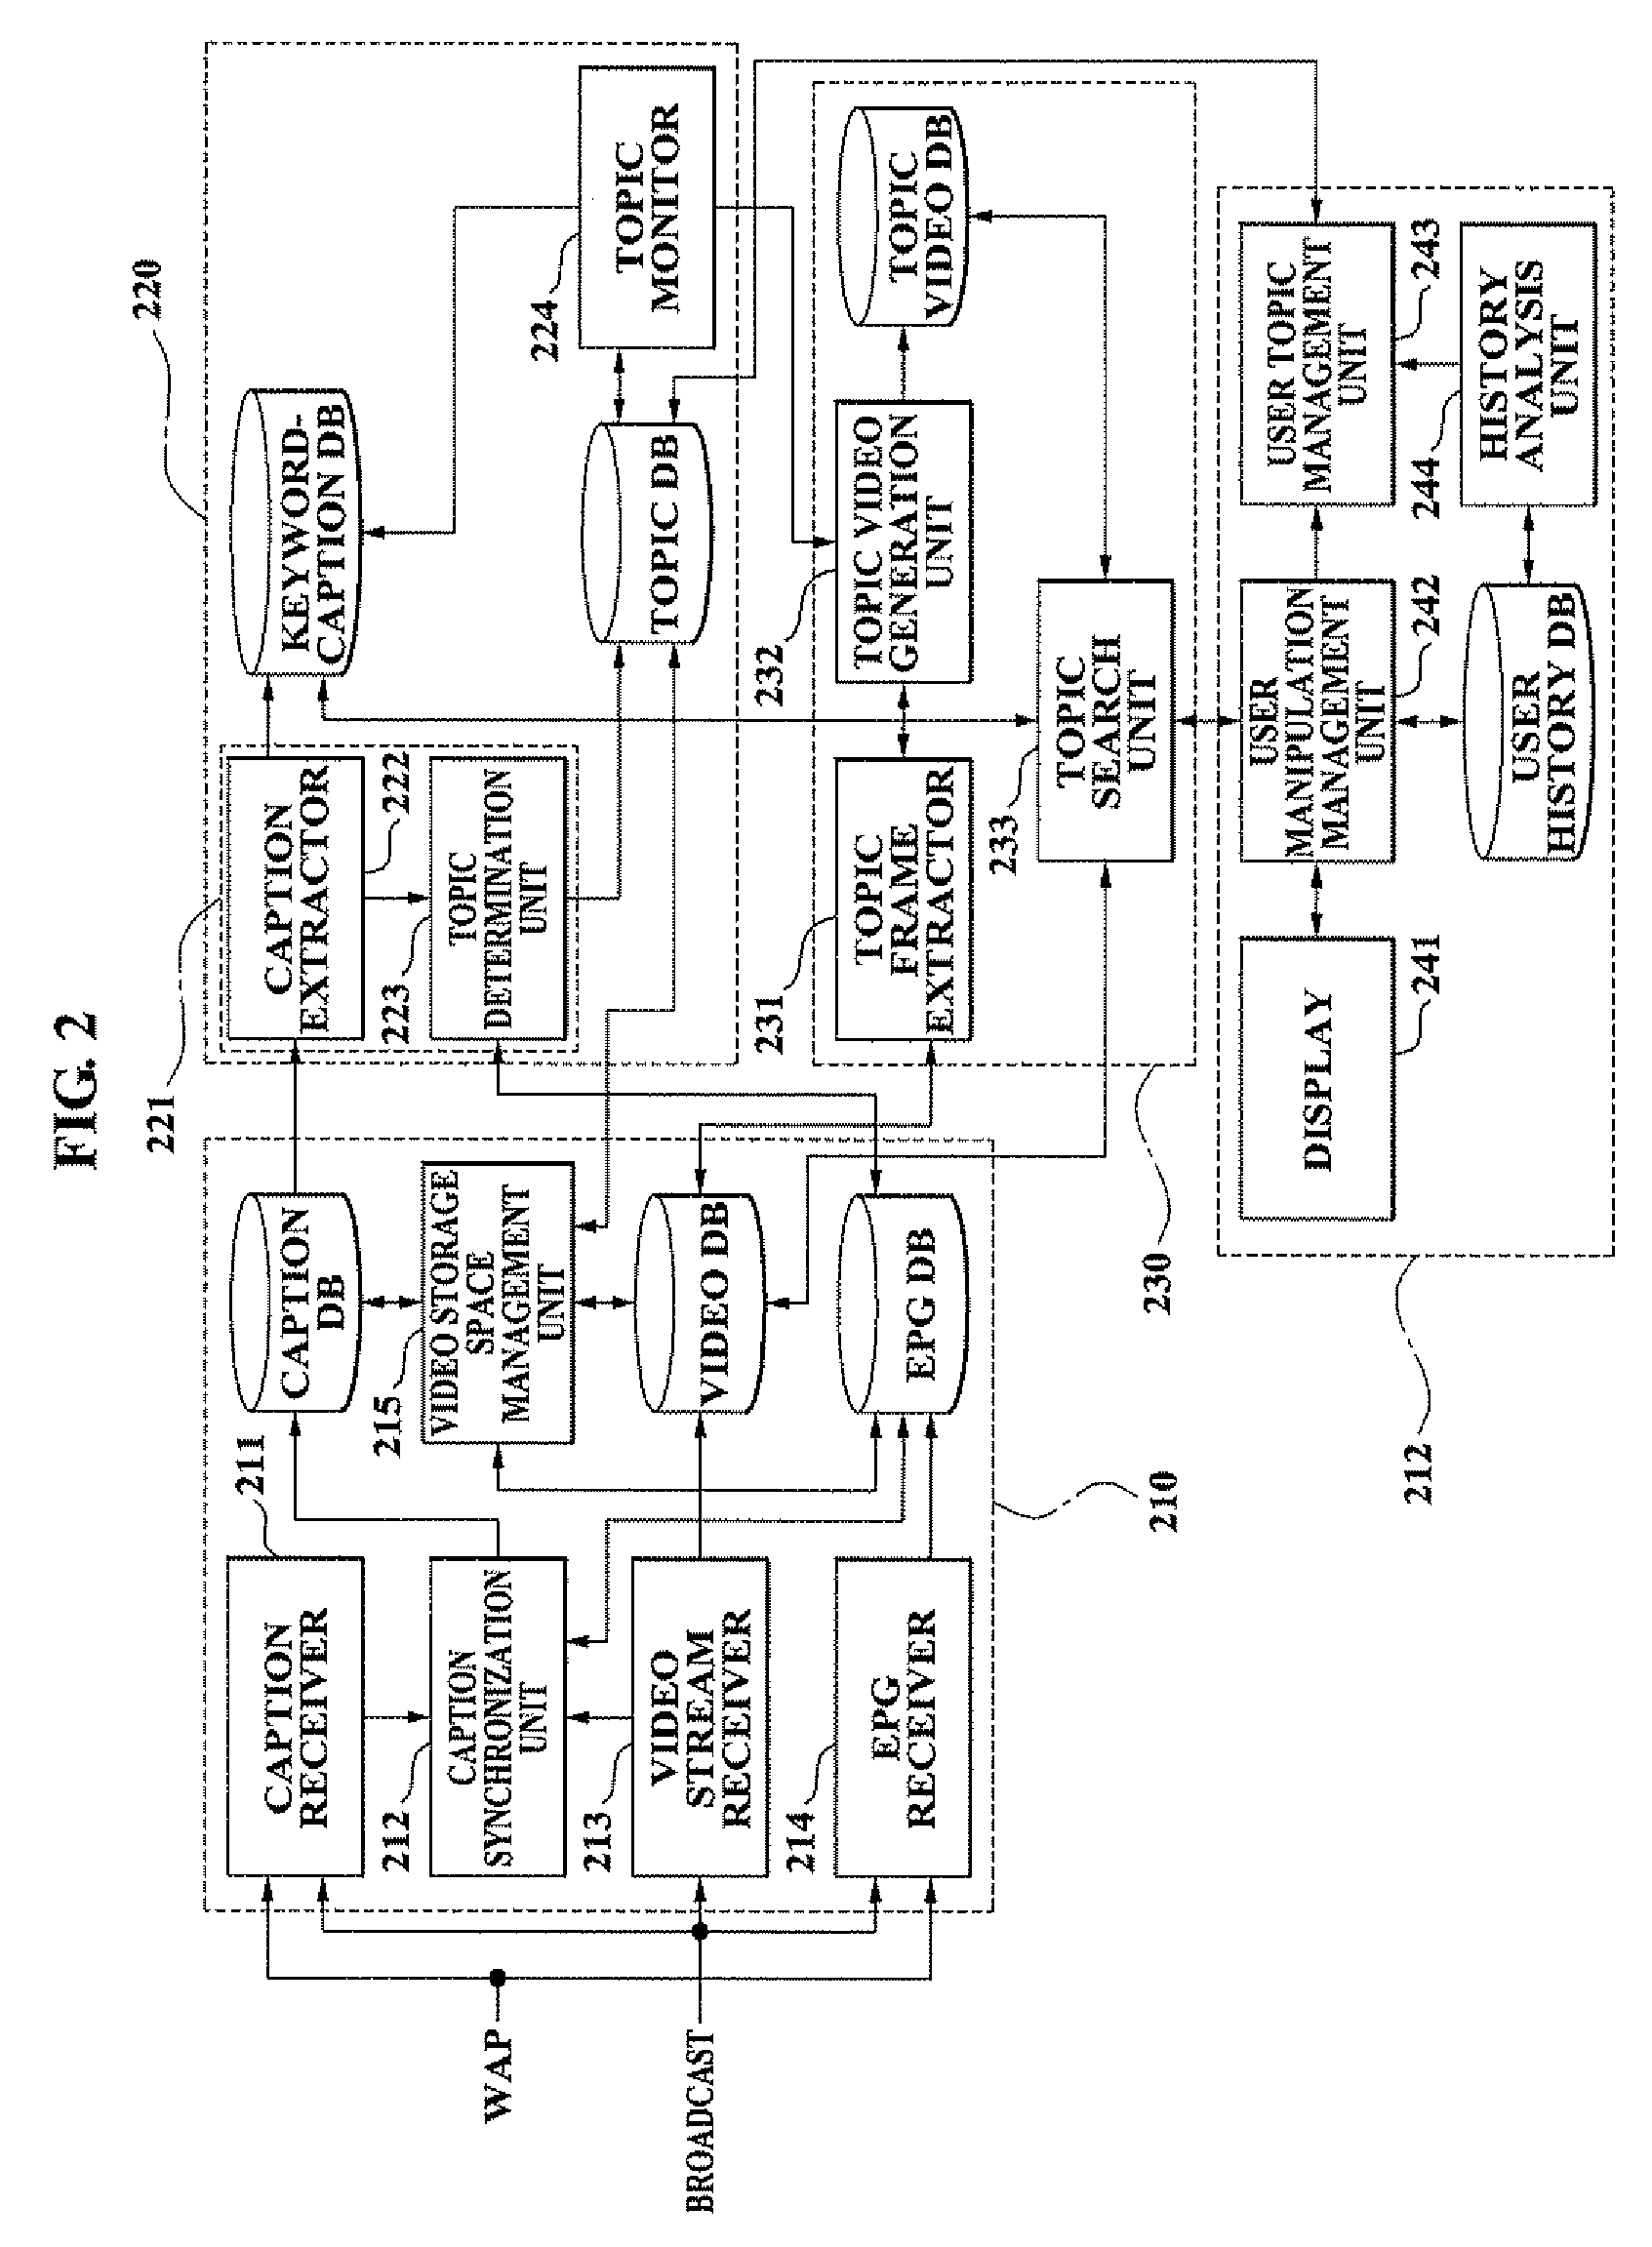 System for managing video based on topic and method using the same and method for searching video based on topic